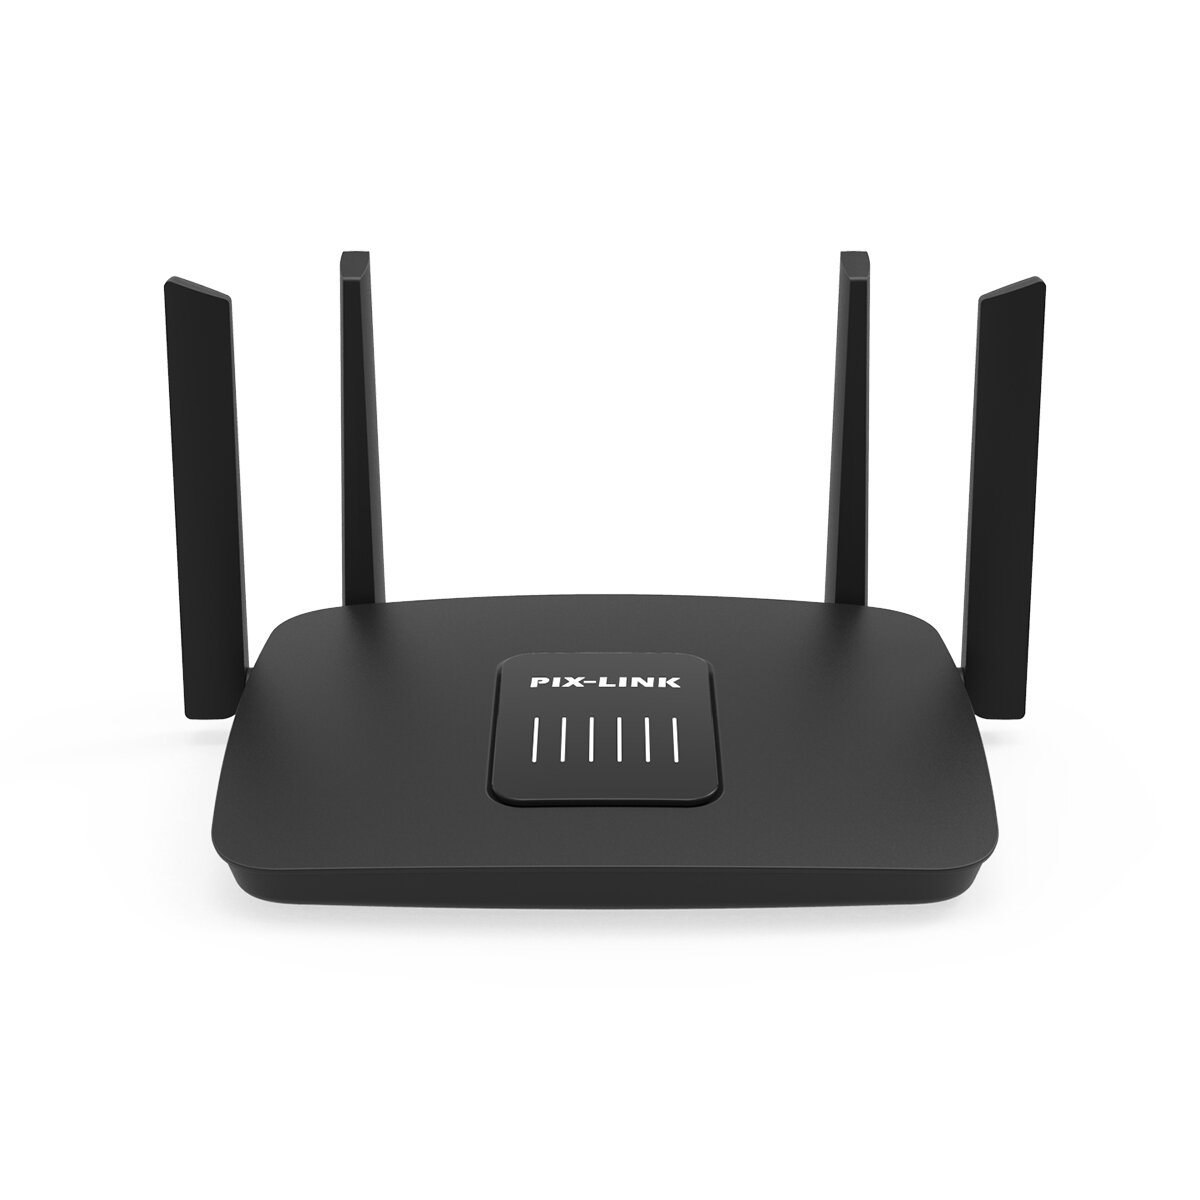 Image of Pixlink 1200Mbps Wireless Router Dual Band WiFi Signal Booster Gigabit Repeater Signal Amplifier with 4 External Antenna